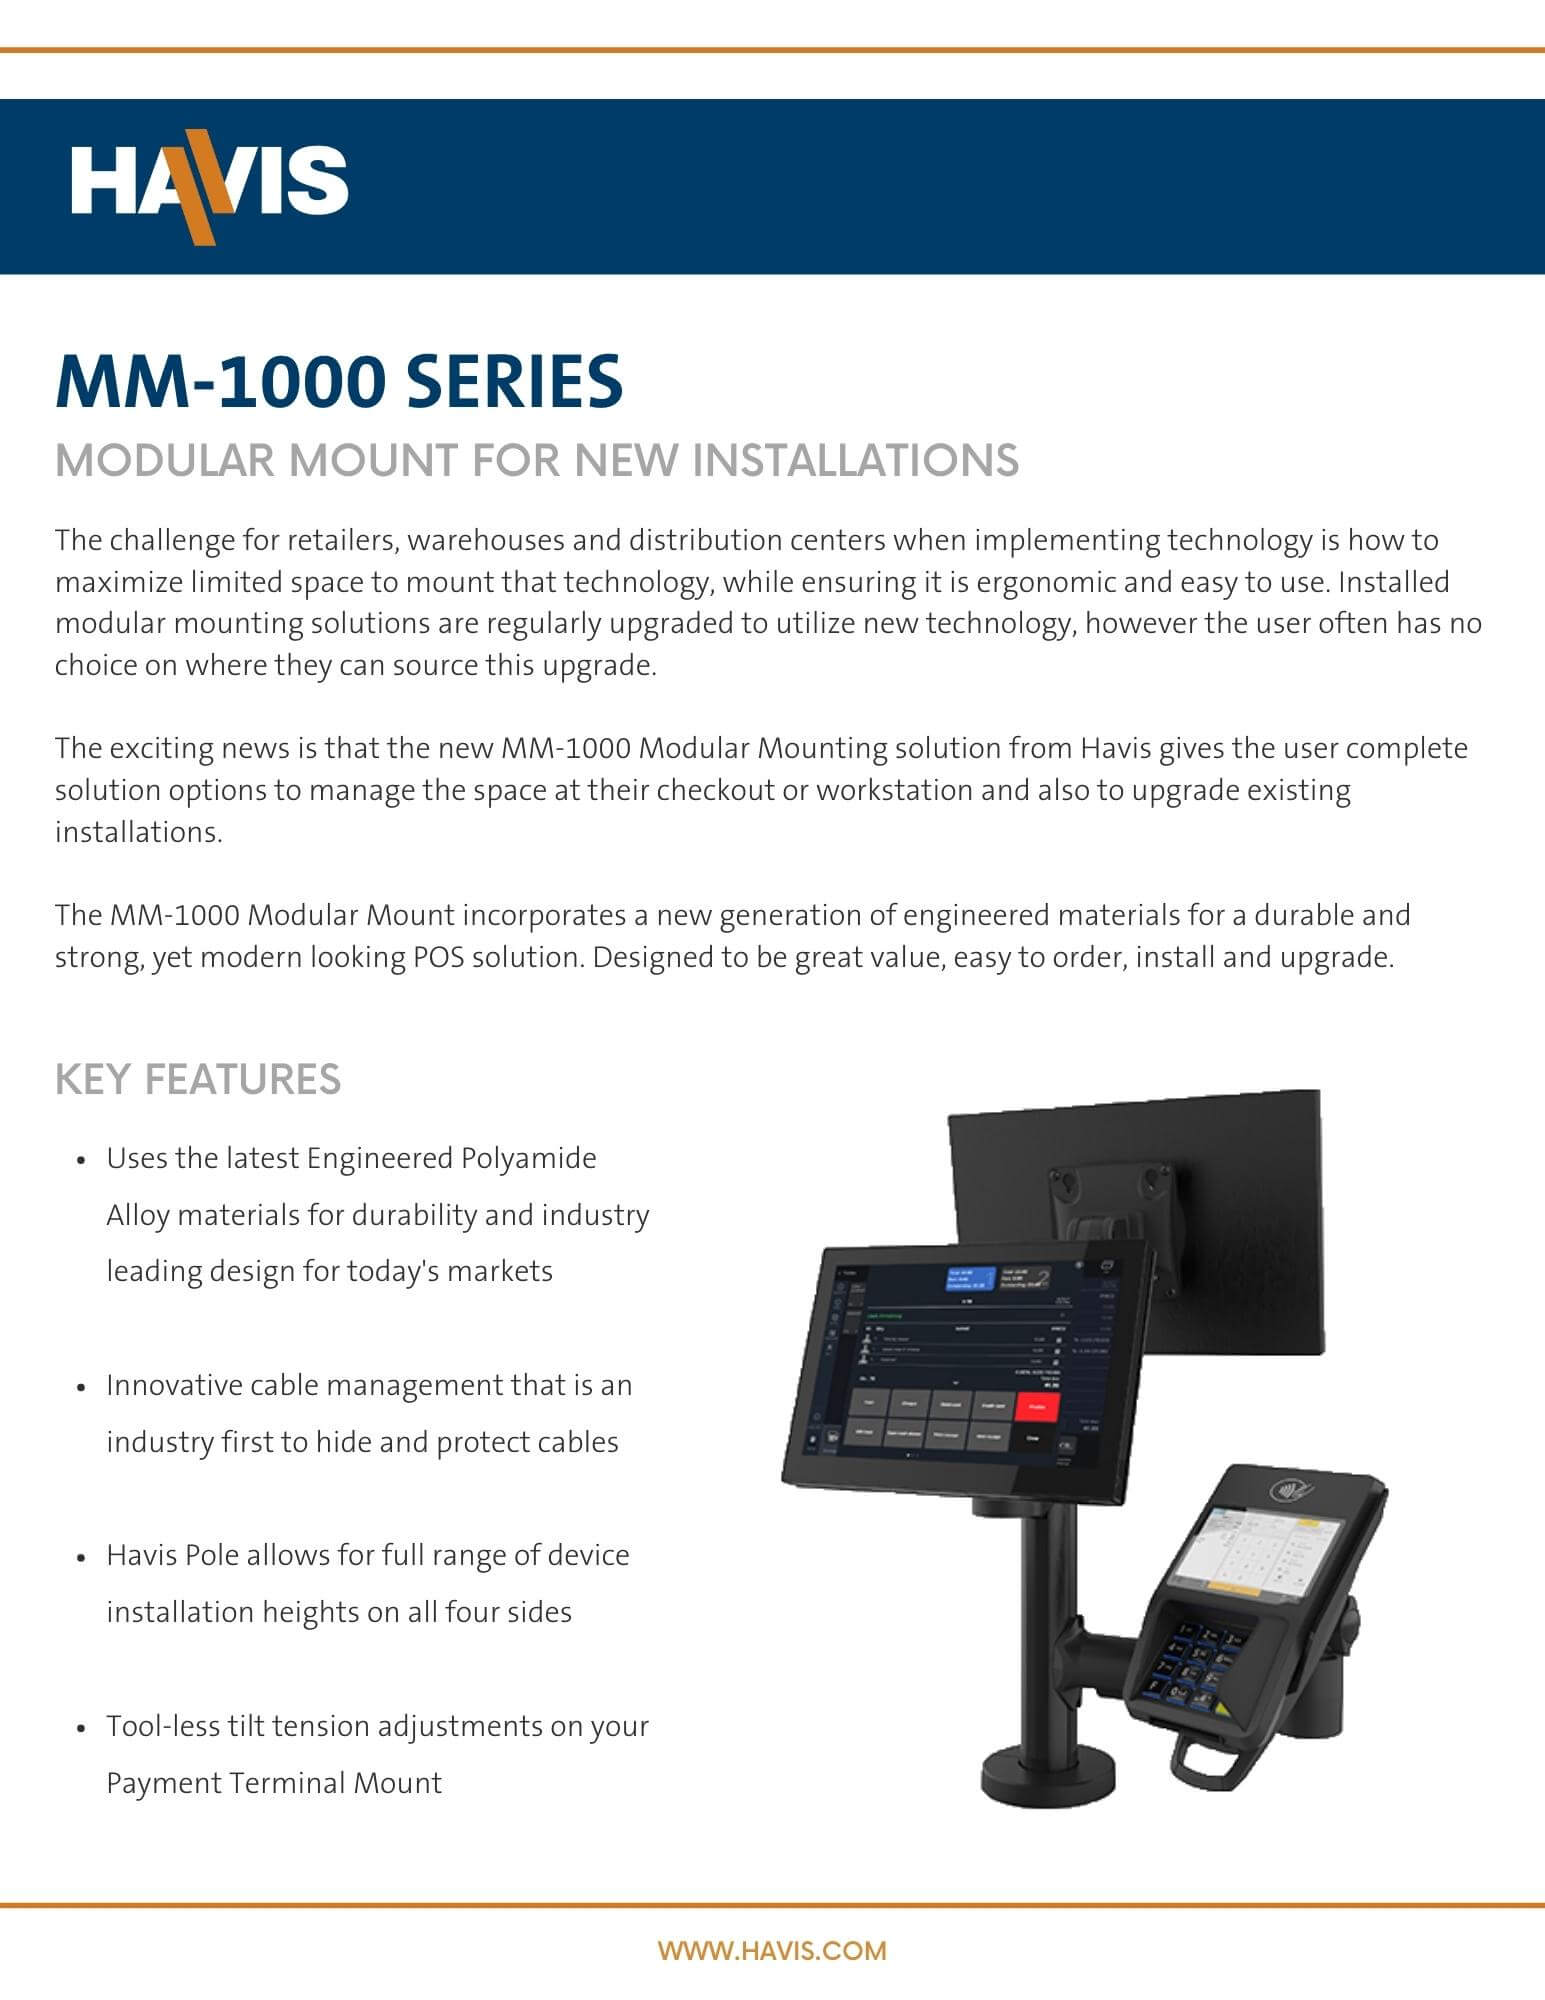 MM-1000 Product Guide - New Installations